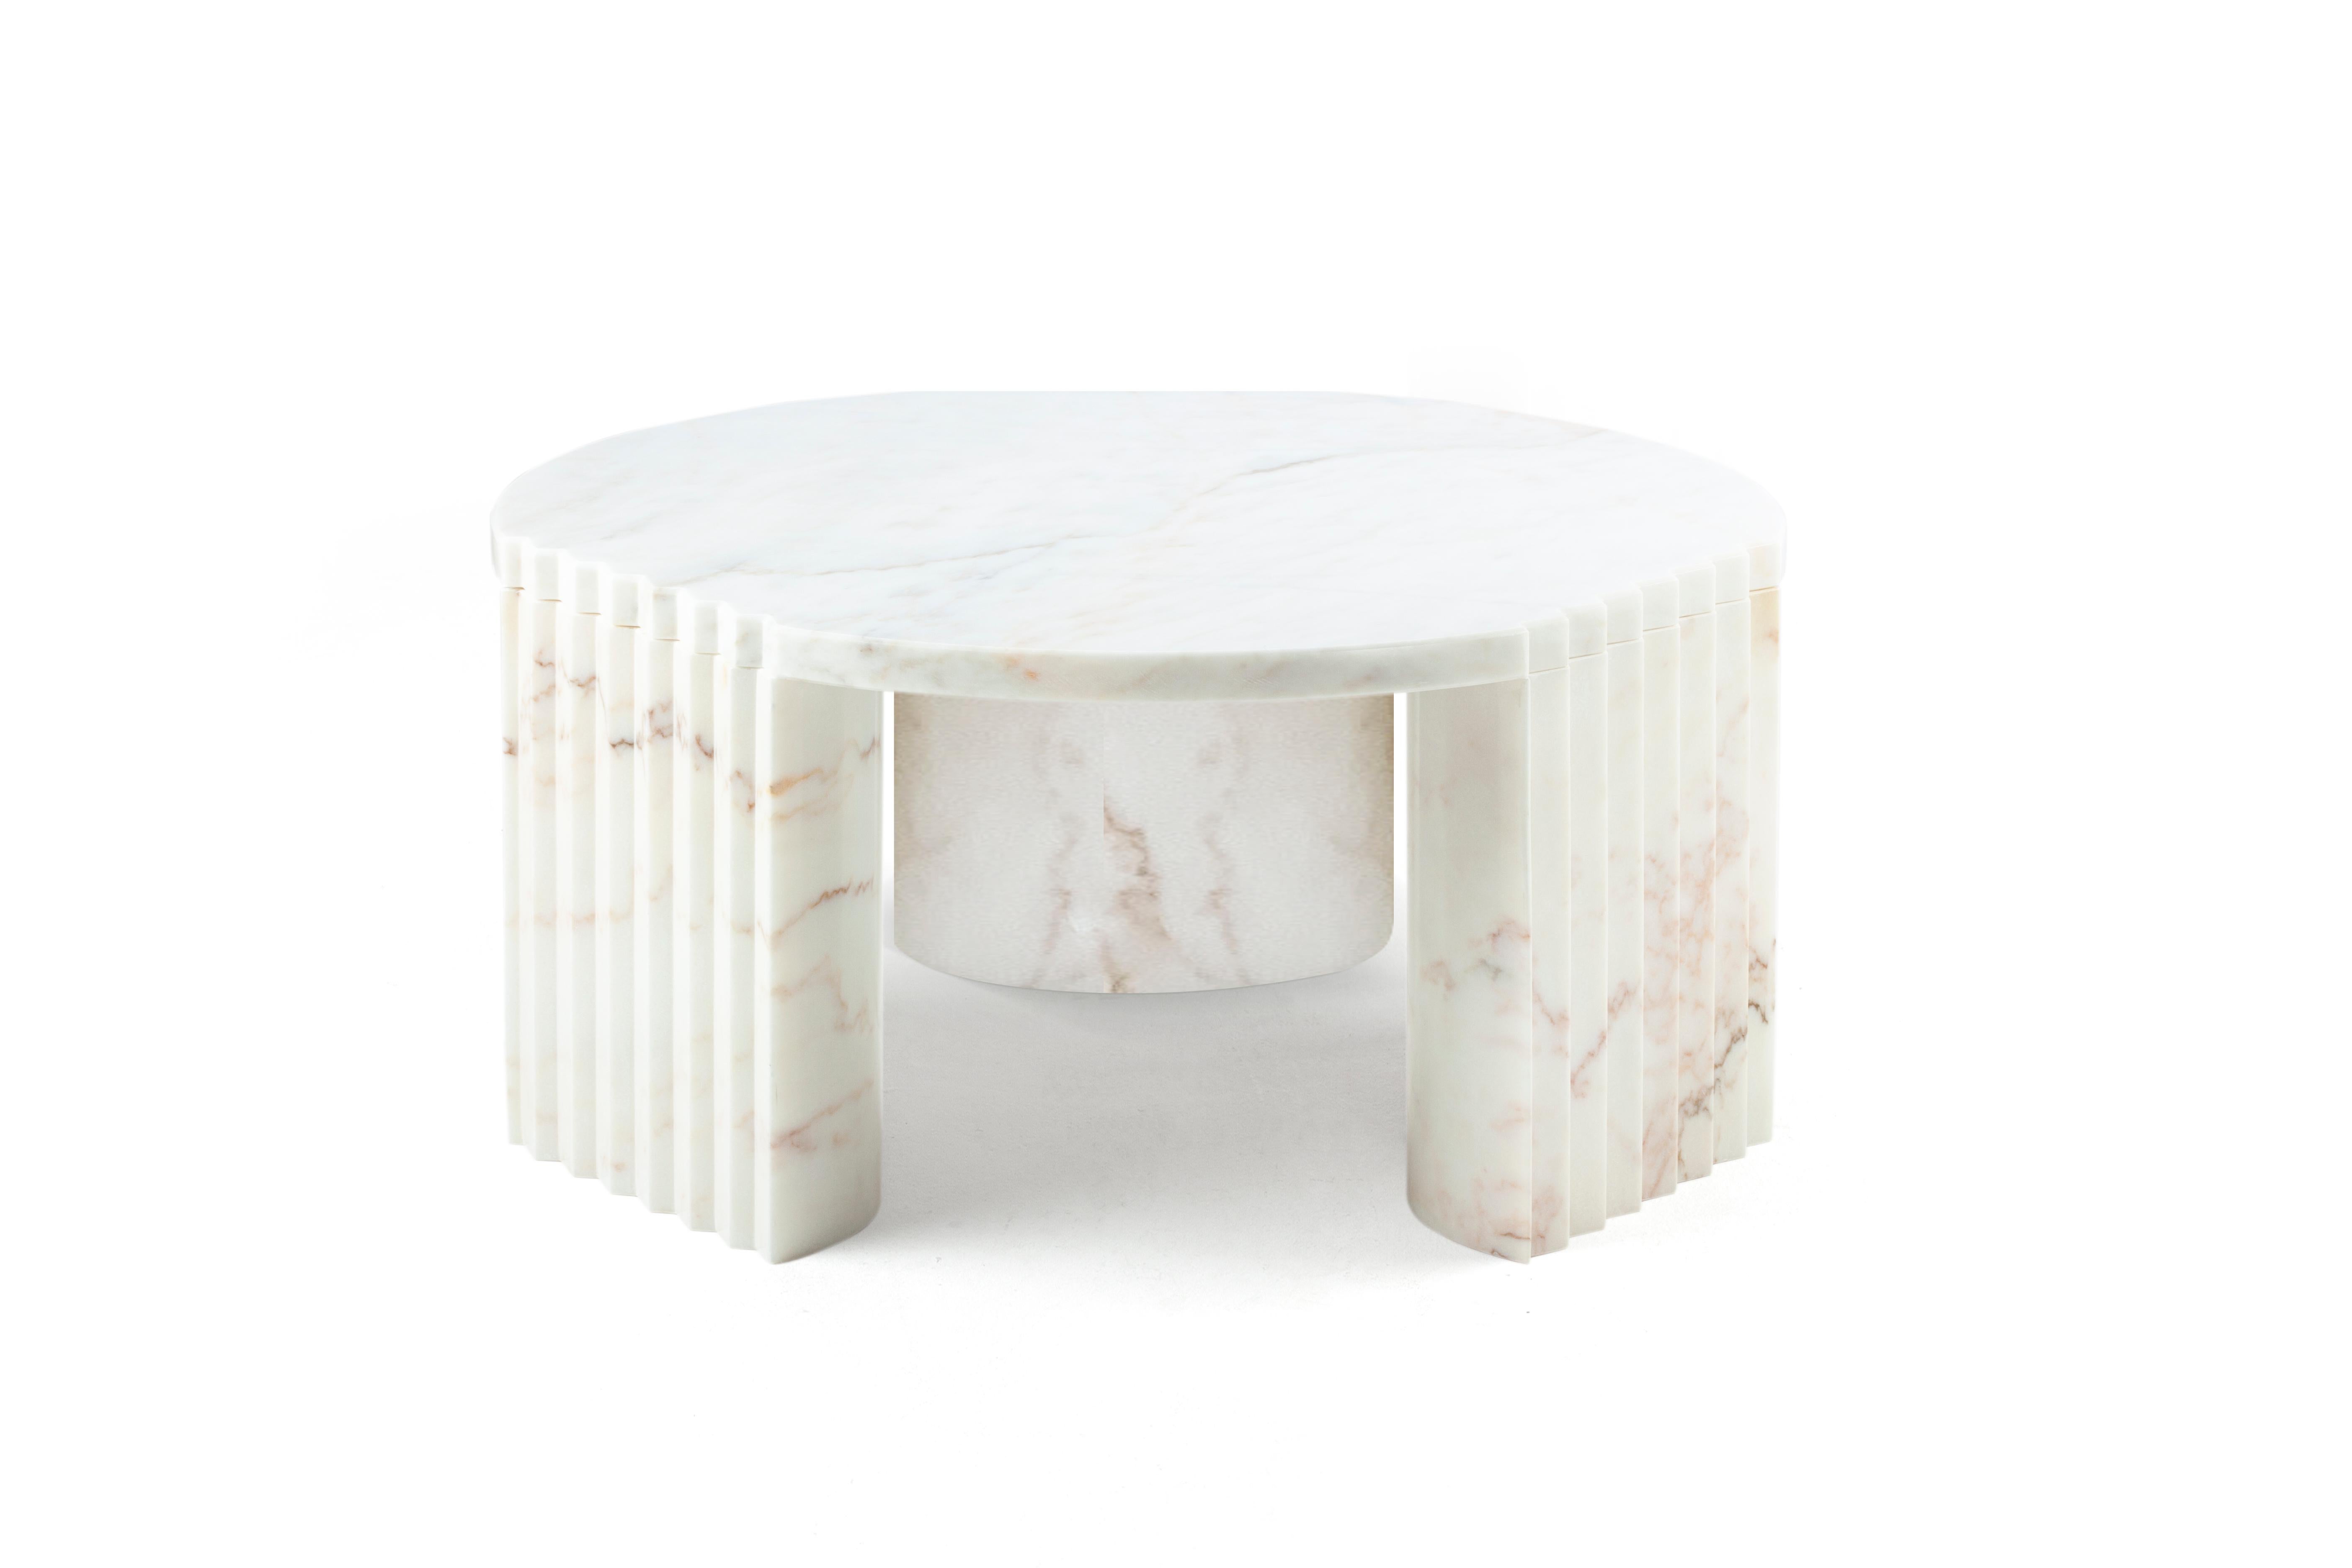 Unique marble caravel center table by Collector
Dimensions: D 80 x H 38 cm
Materials: Marble
Other materials available. 

Colombo, the Italian explorer, left from Portugal with 3 (as low tables are) CARAVELS to discover the world.
Inspired by